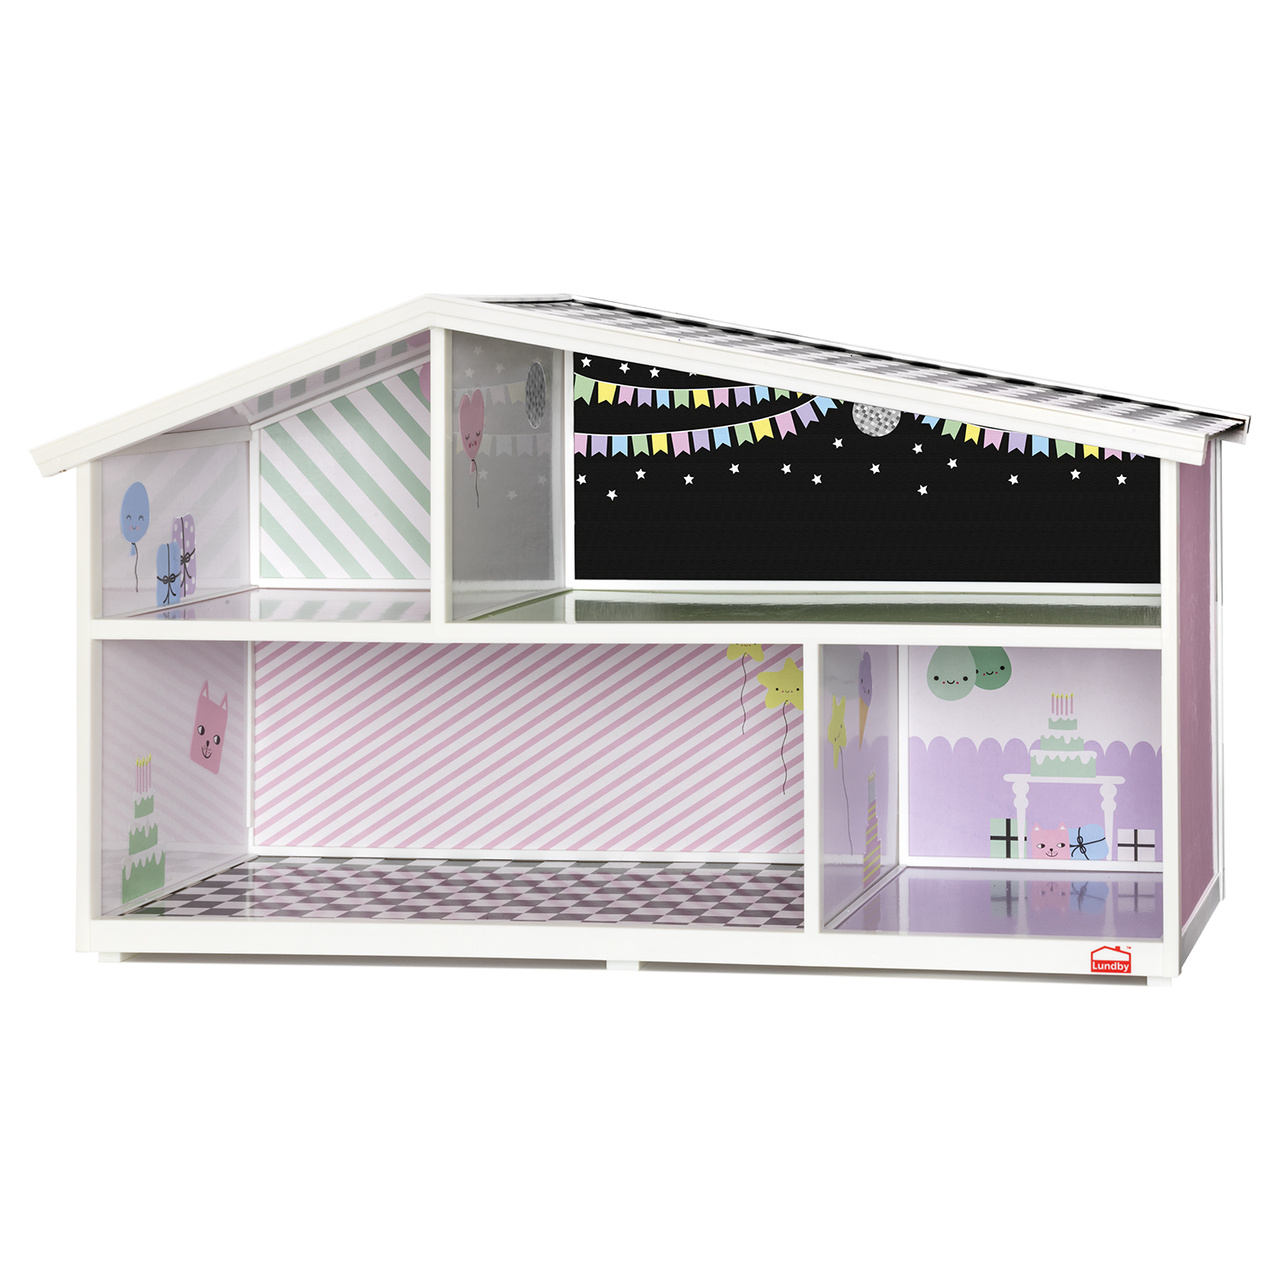 Doll house furniture & doll house accessories lundby wall set party